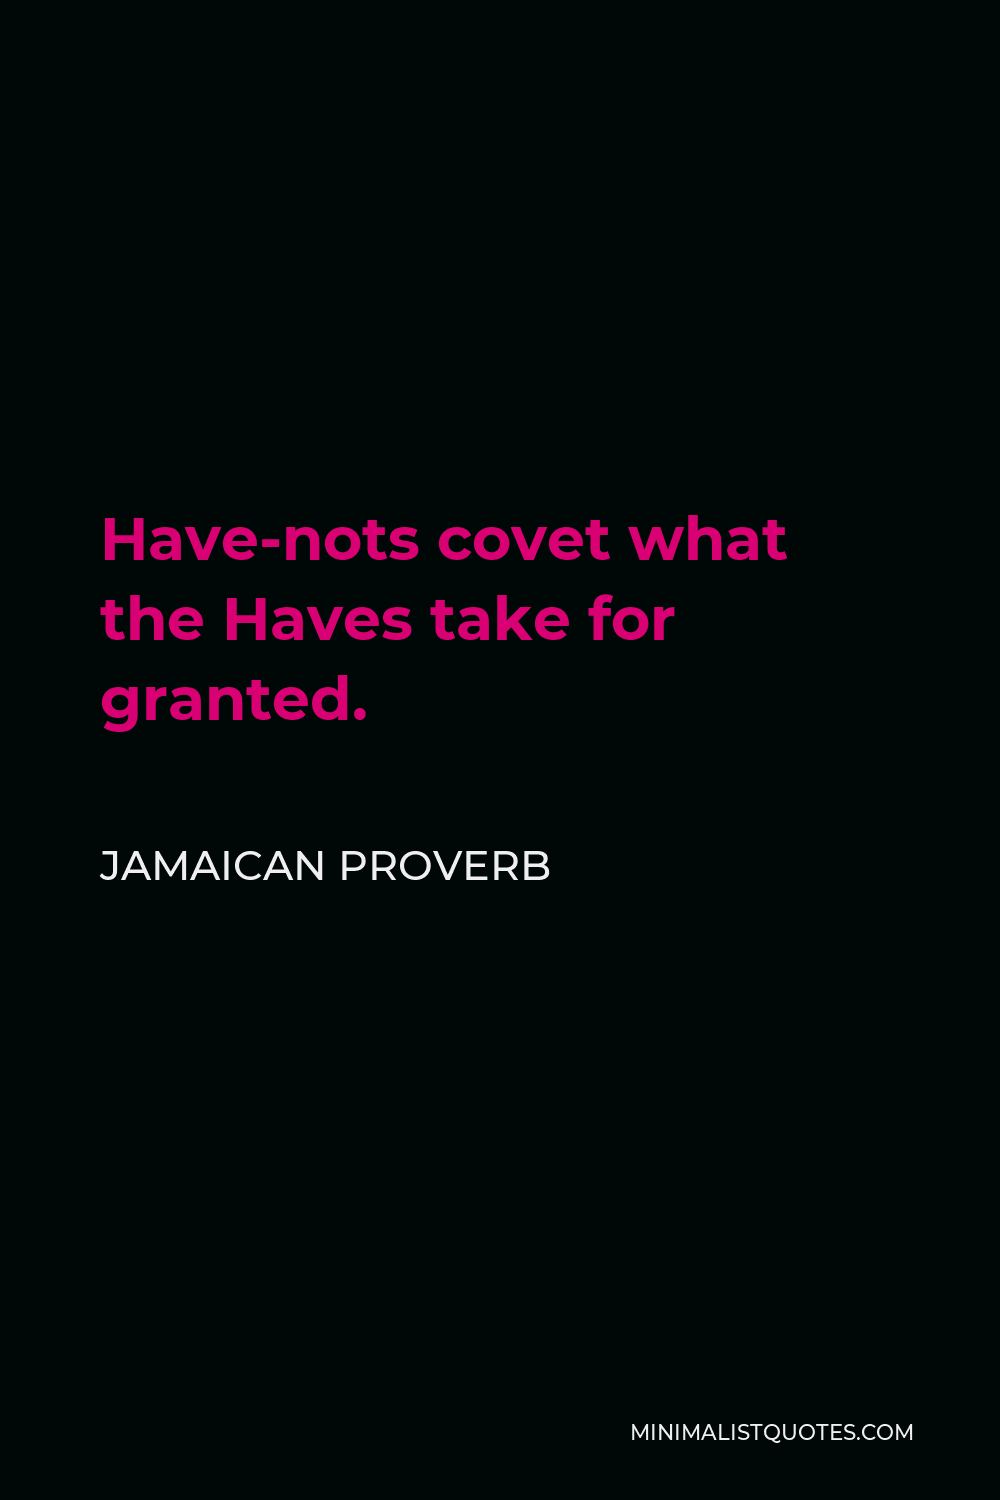 Jamaican Proverb Quote - Have-nots covet what the Haves take for granted.